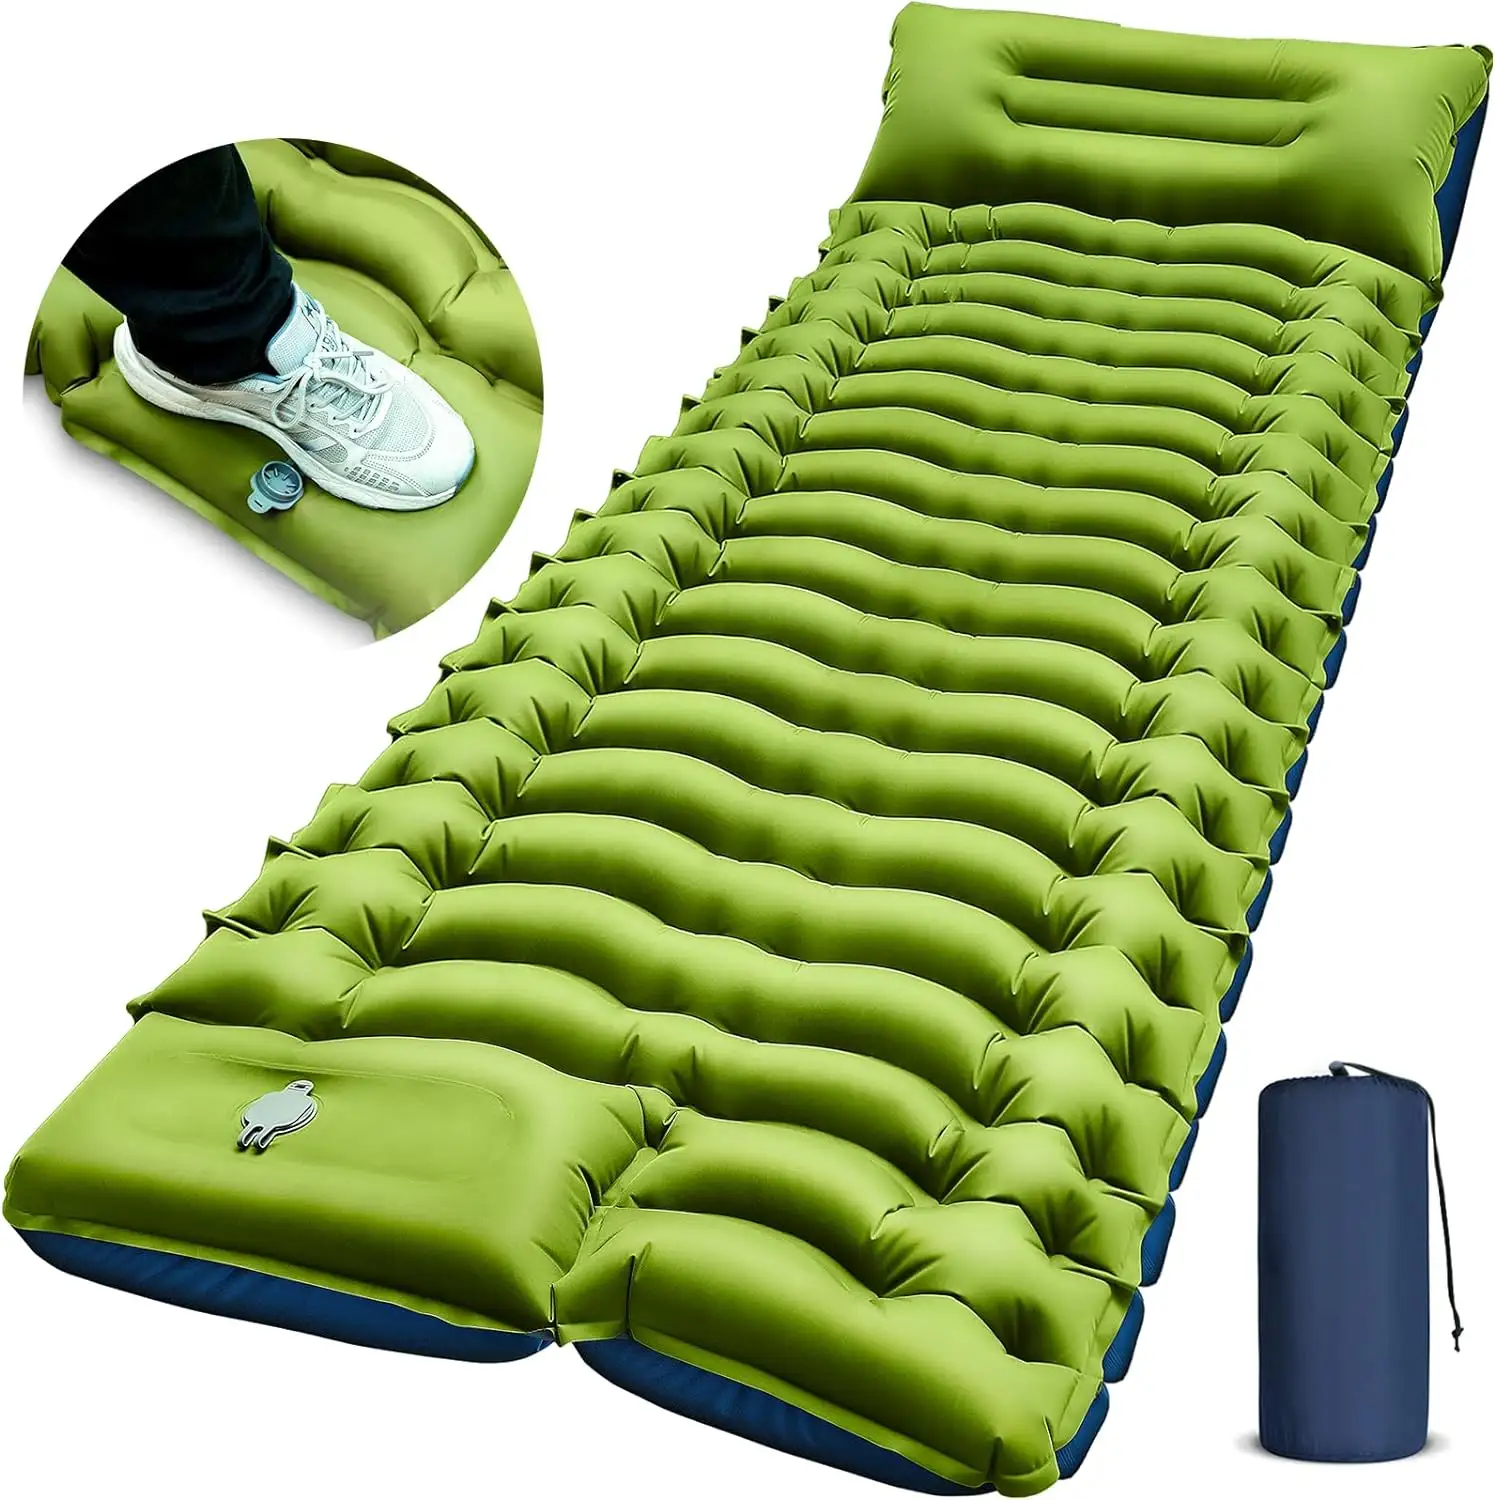 NPOT Extra Thickness 4 Inch Inflatable Camping Sleeping Mat with Pillow Built-in Foot Press